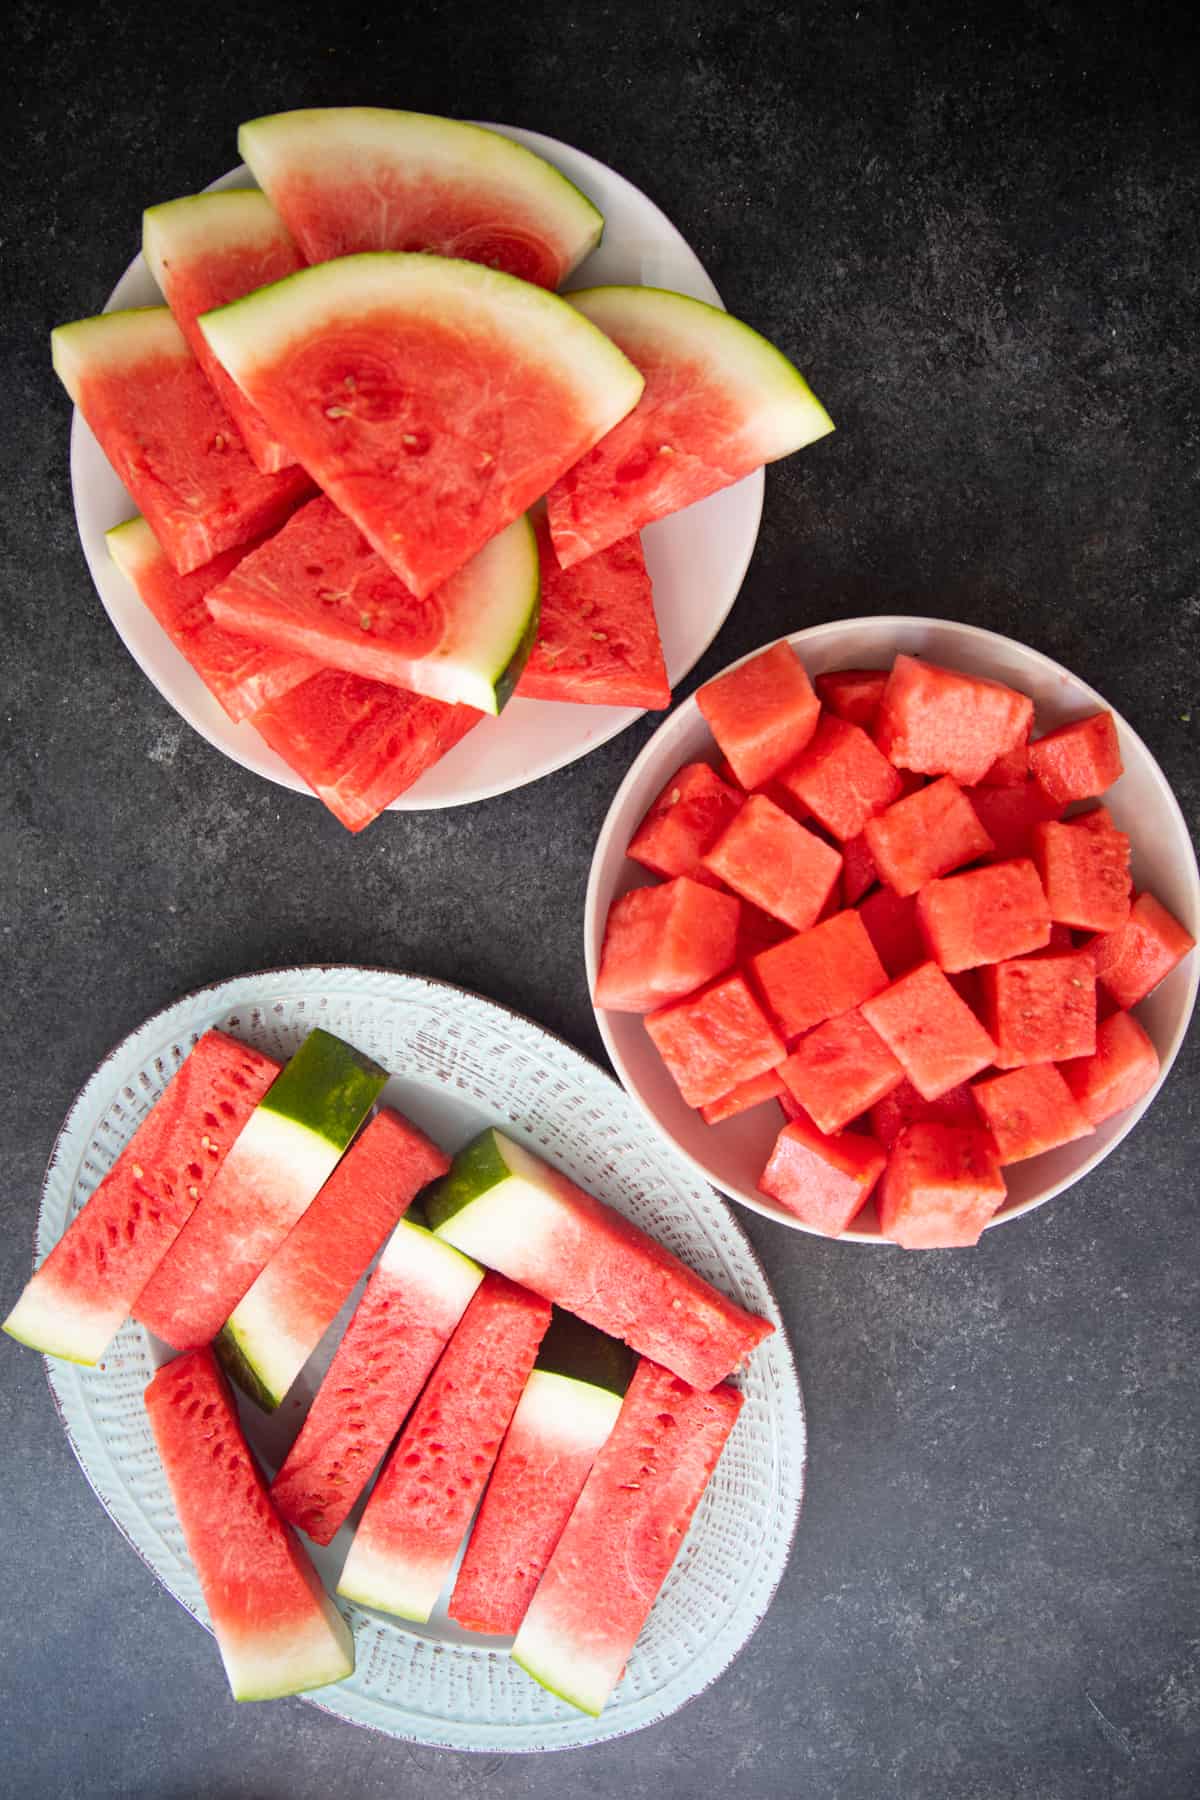 You can cut watermelon into different shapes.